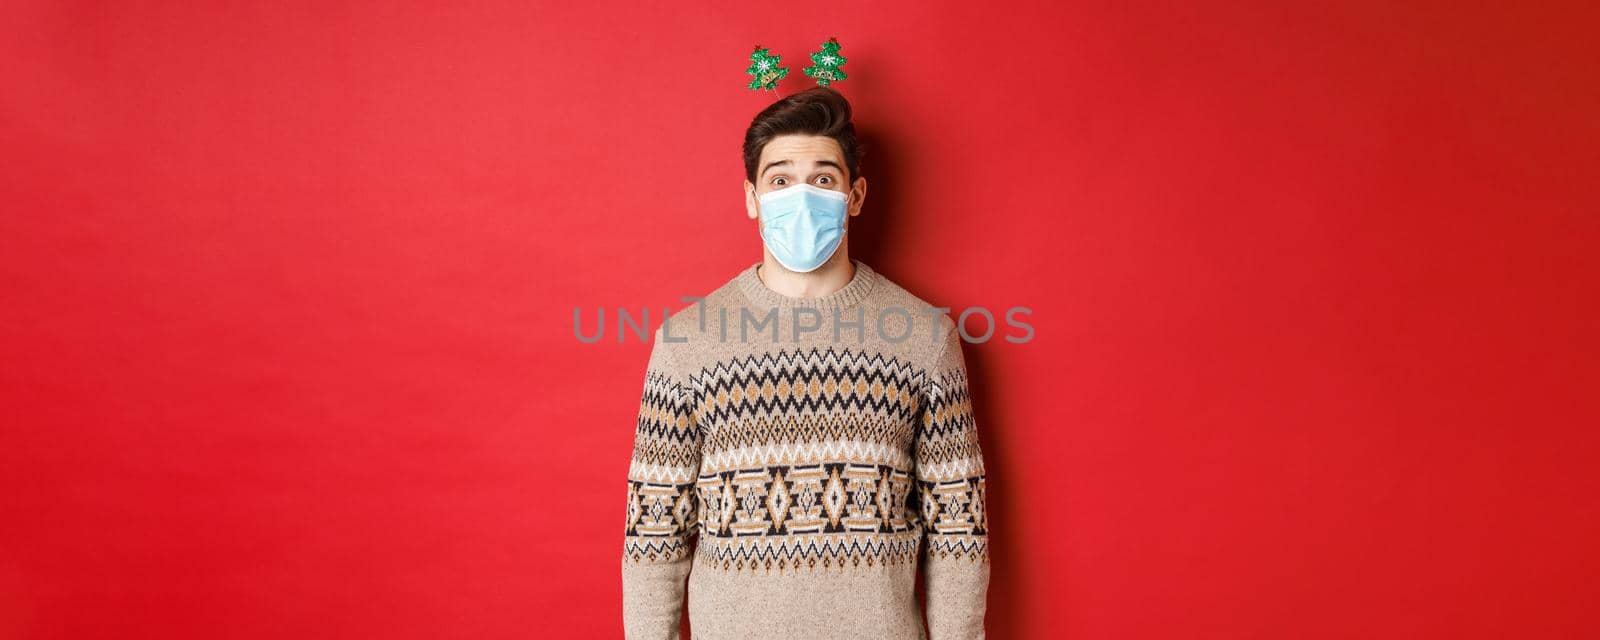 Concept of christmas, covid-19 and social distancing. Cheerful young man in medical mask and new year clothing, celebrating holidays during pandemic, standing over red background.